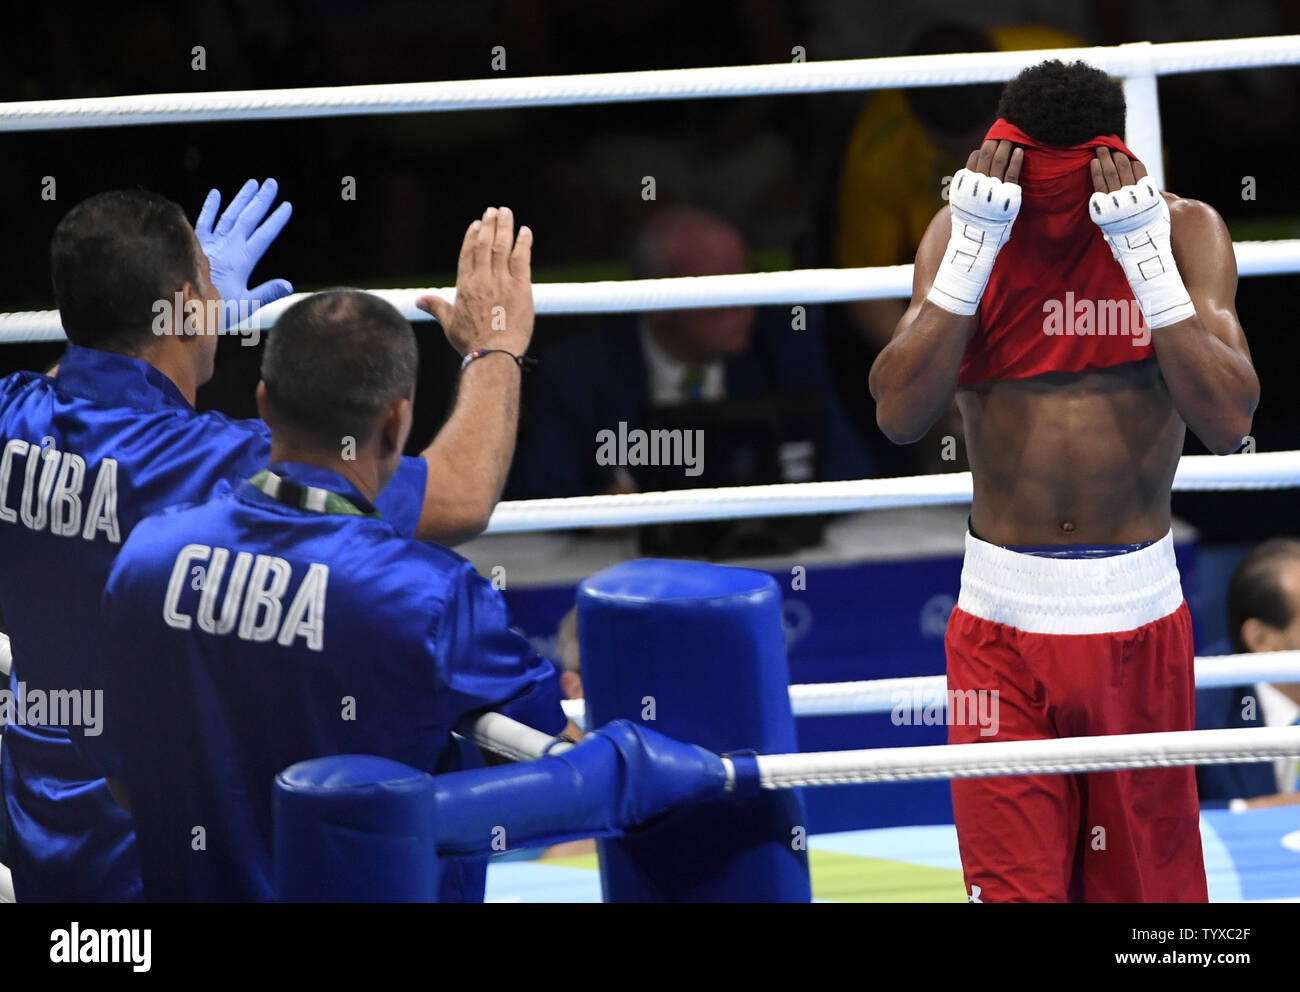 United States' boxer Shakur Stevenson pulls his sirt over his head in disappointment after losing a split decision to Cuba's Robeisy Ramirez in a Men's Boxing Bantamweight bout at the 2016 Rio Summer Olympics in Rio de Janeiro, Brazil, August 20, 2016. Ramirez won the Gold Medal and Stevenson won the Silver.          Photo by Mike Theiler/UPI Stock Photo